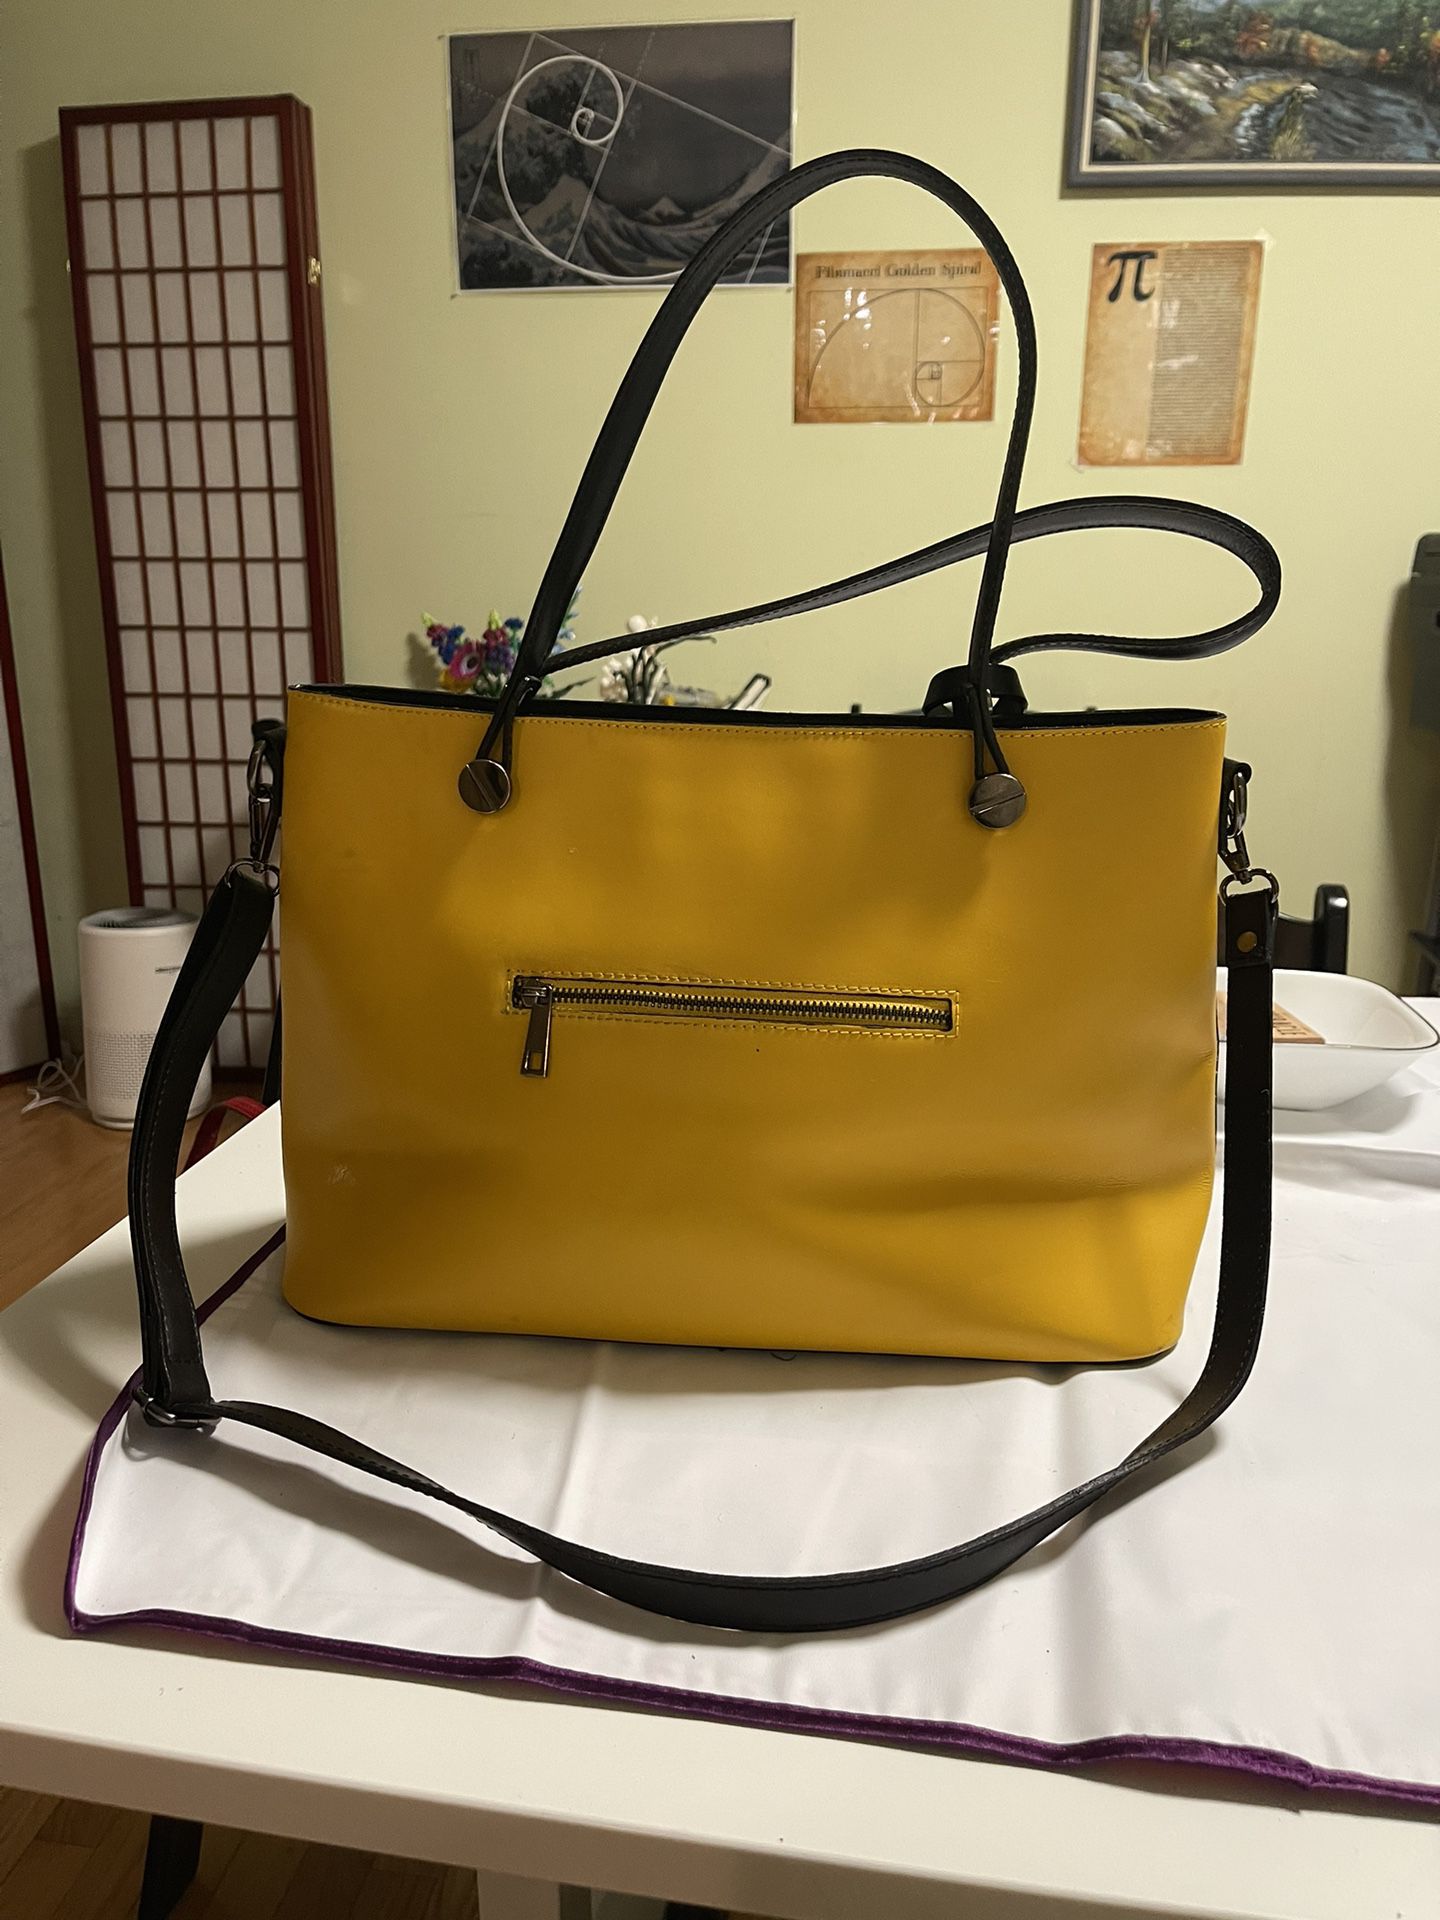 NWOT Genuine Vera Pelle Black Yellow Leather Bag Tote for Sale in Natick,  MA - OfferUp